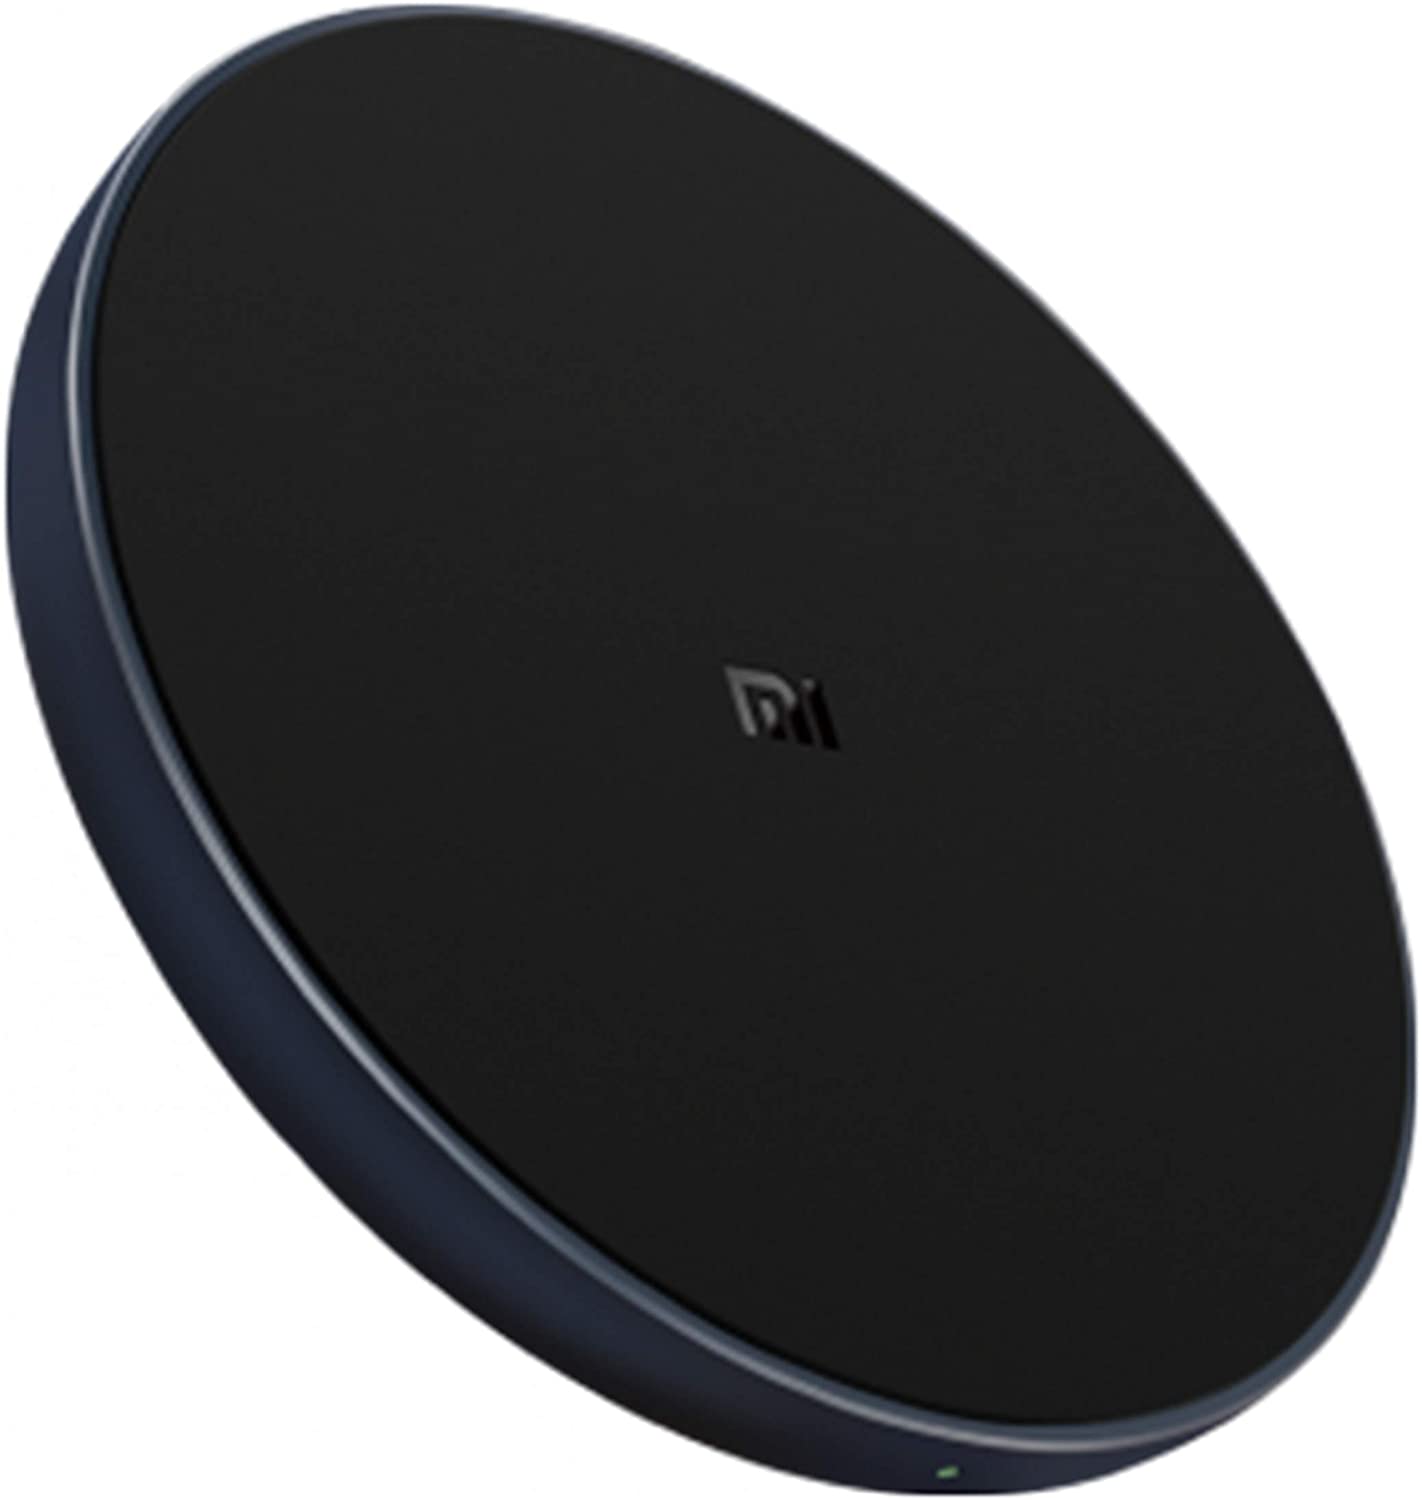 Xiaomi Mi Wireless Charging Pad, Qi Certified Up to 10W Fast Charging, Compatible with iPhone 8 Series for 7.5W Wireless Charging, Samsung S9 Series for 10W Charging with QC2.0 or QC3.0 Adapter